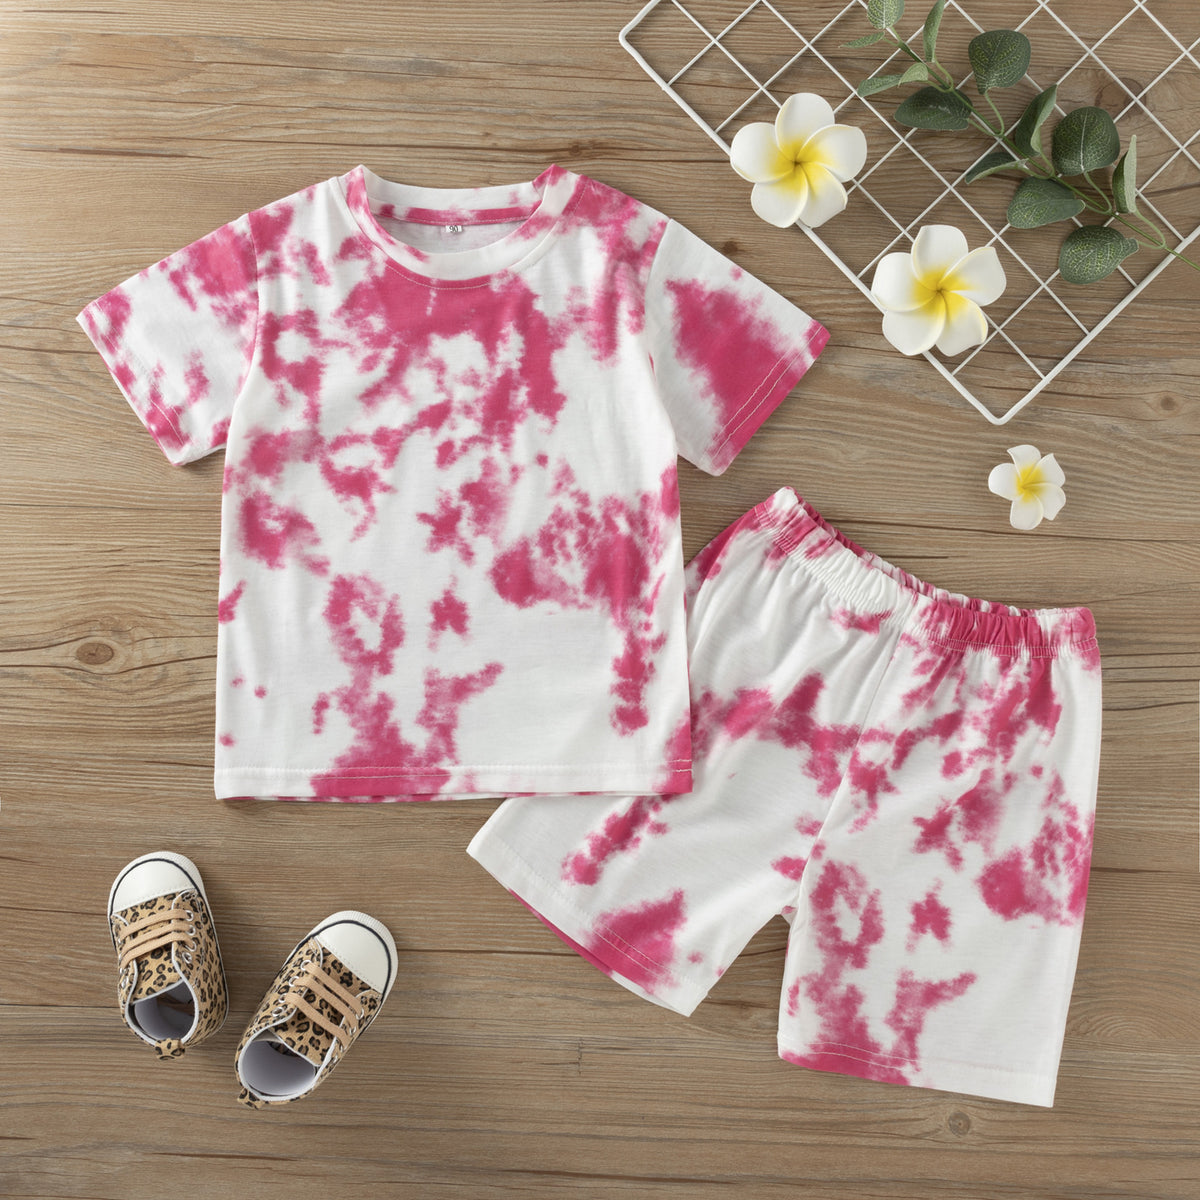 2 Pieces Set Baby Kid Girls Tie Dye T-Shirts And Shorts Wholesale 23022023